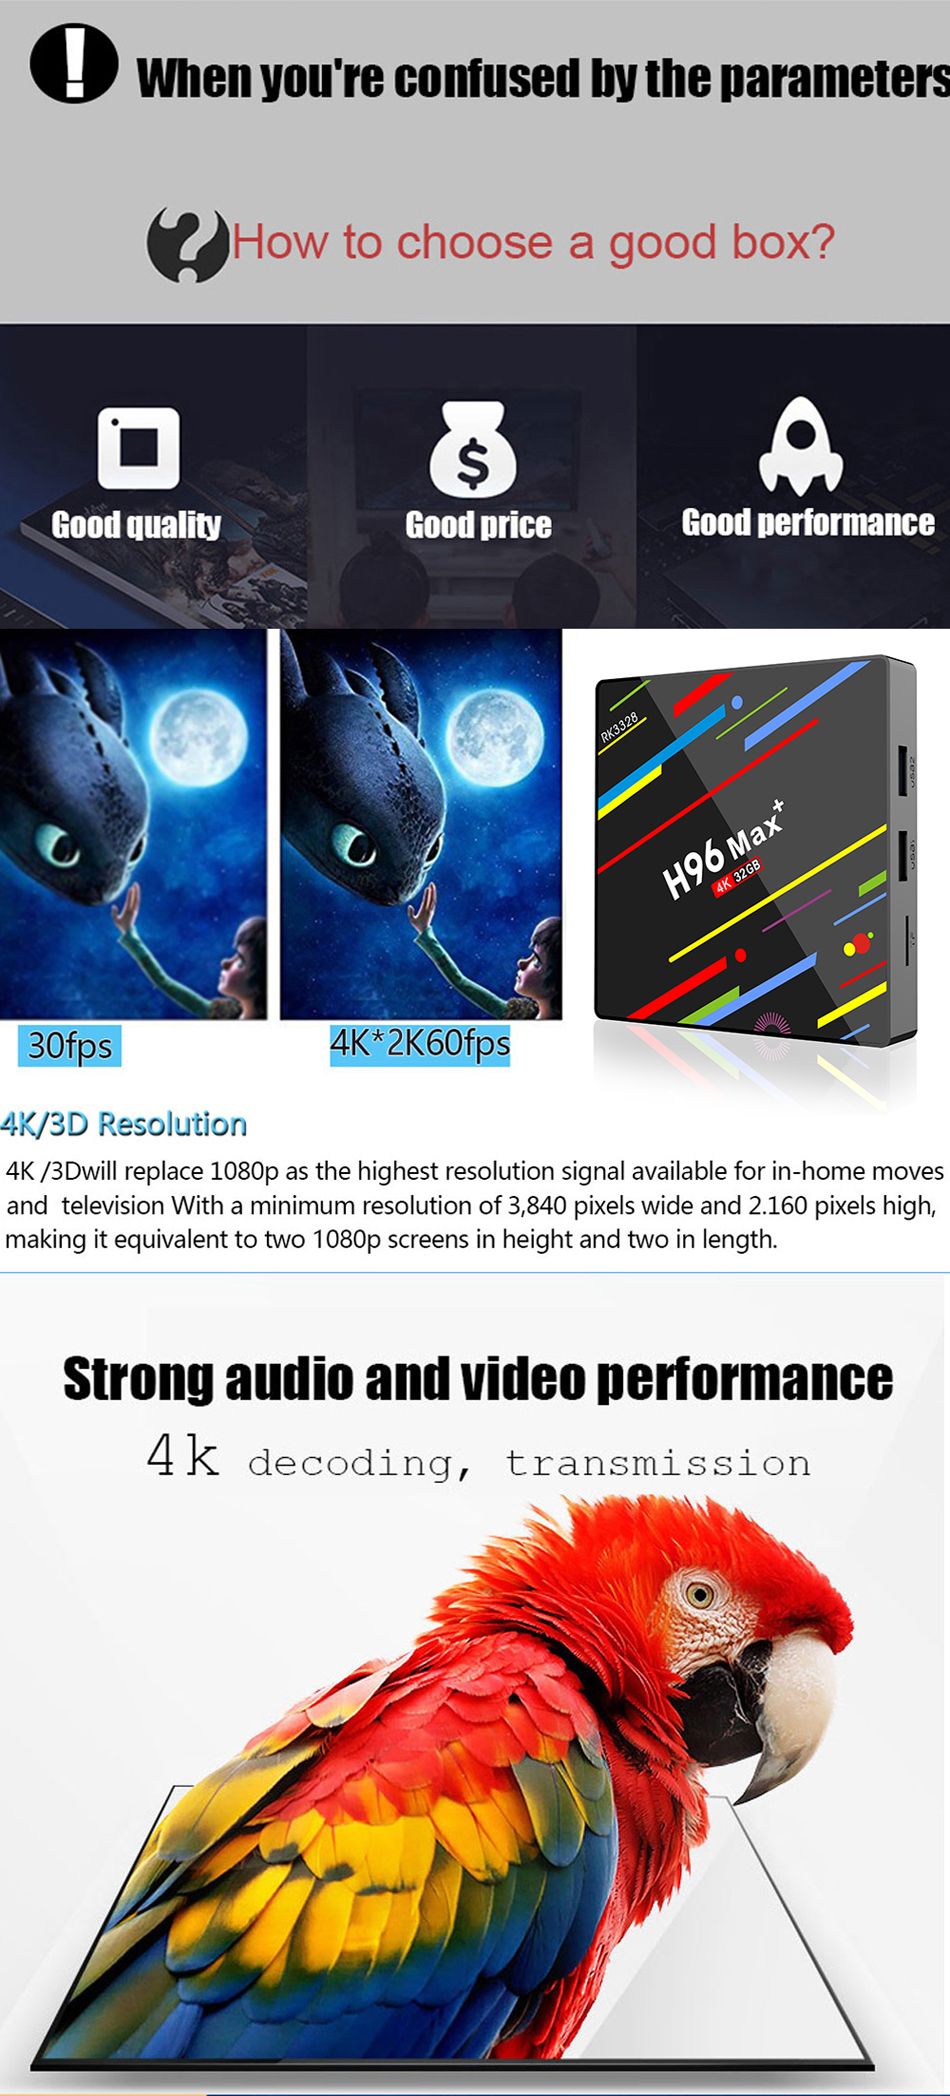 H96-Max-Plus-RK3328-4G32G-Android-81-USB30-Voice-Control-TV-Box-Support-HD-Netflix-4K-Youtube-1340733